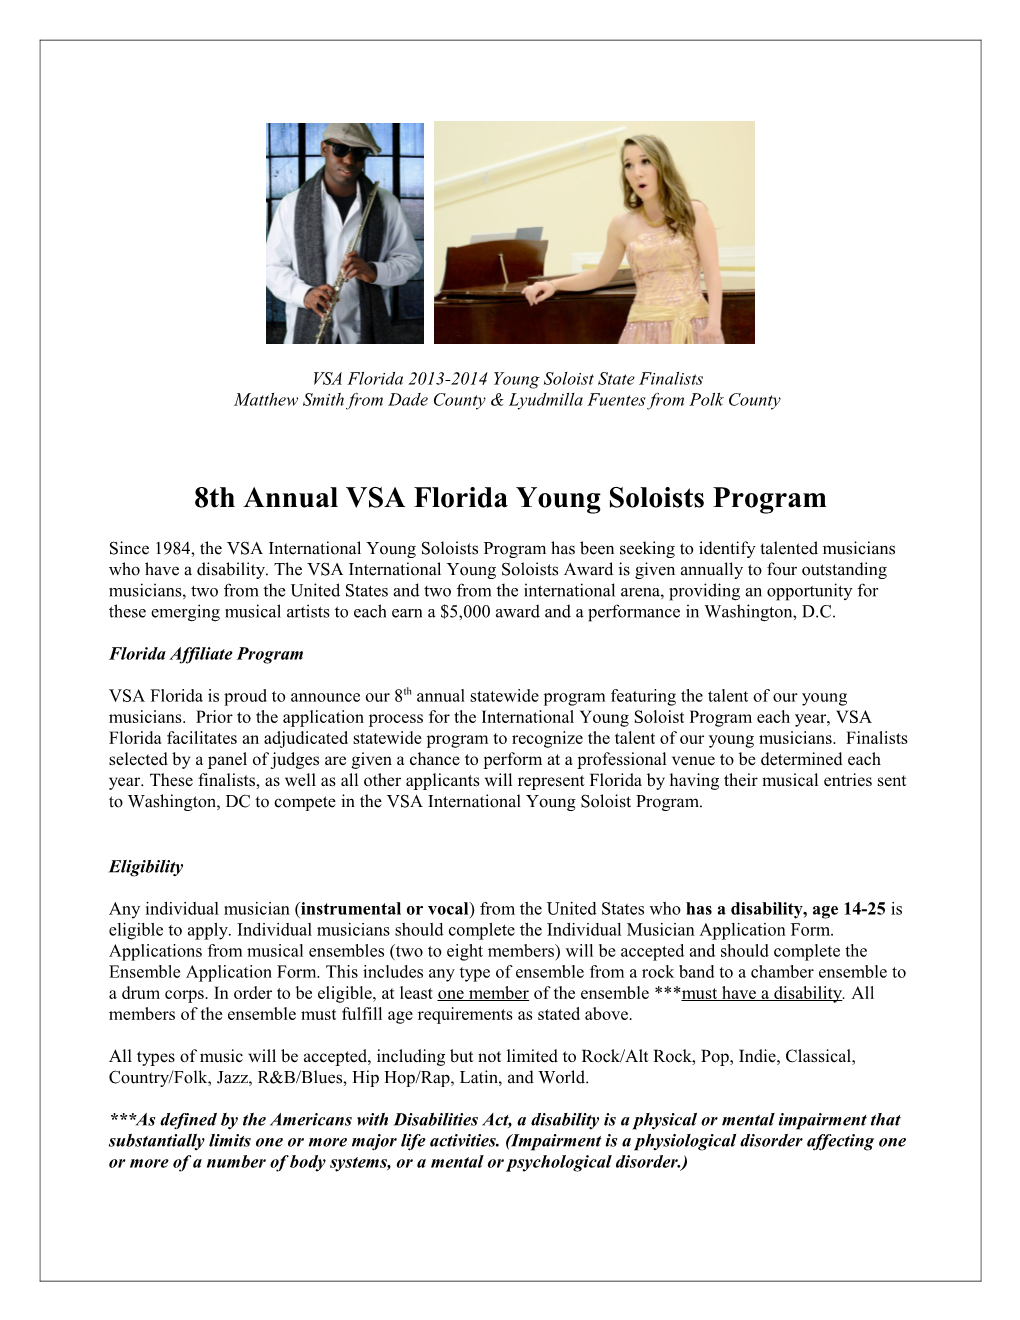 VSA Florida 2013-2014 Young Soloist State Finalists